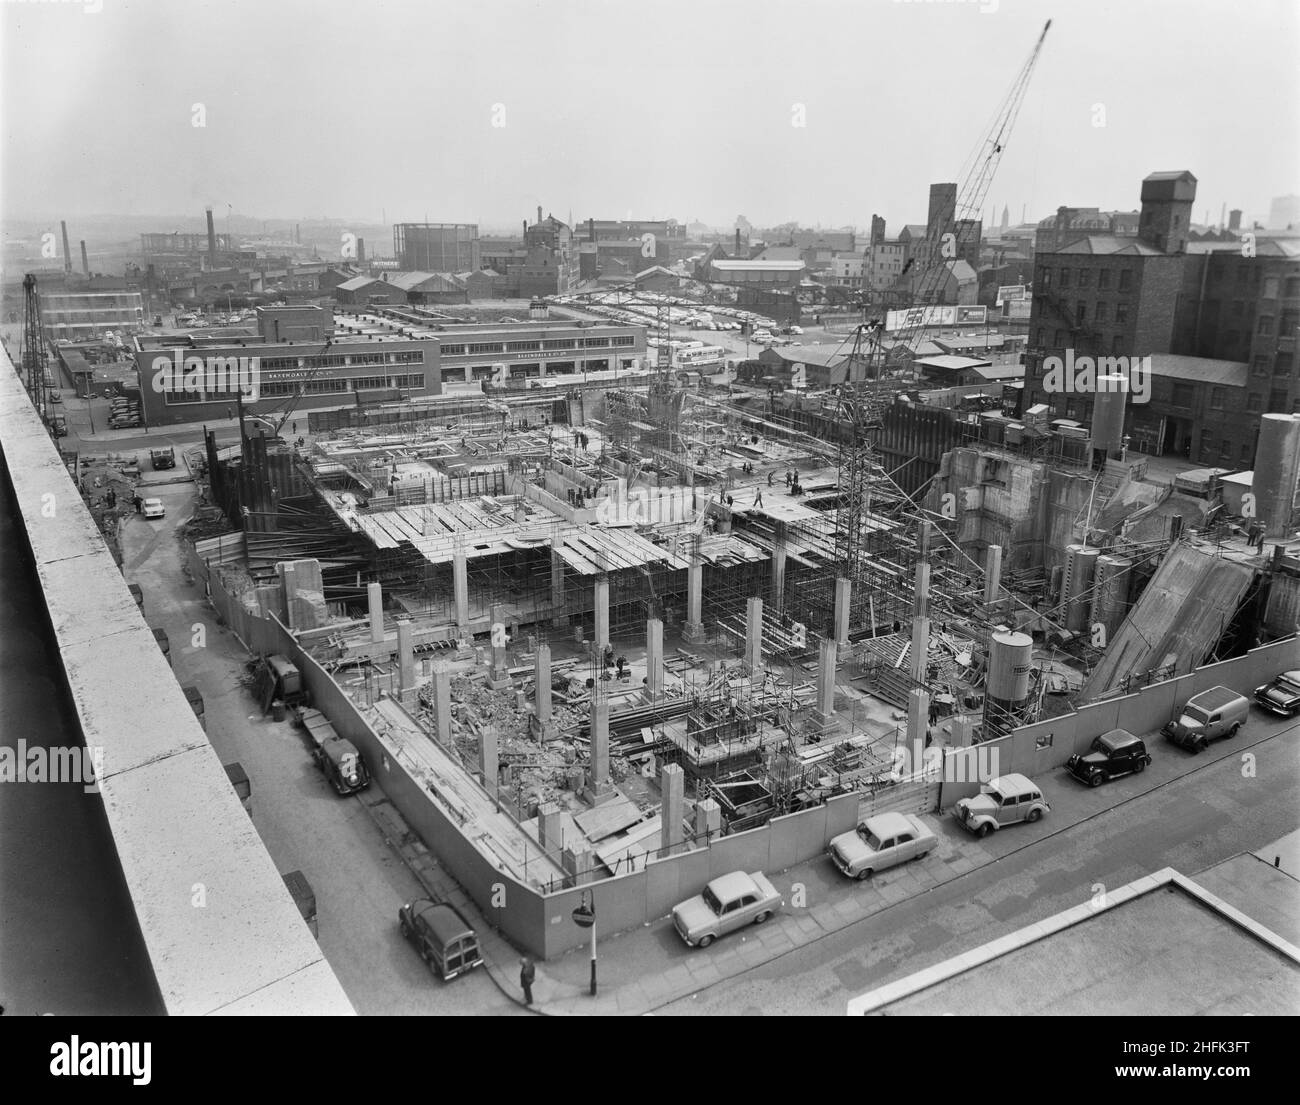 CIS Building, Cooperative Insurance Society Tower, Miller Street, Manchester, 25/05/1960. Looking north-east over the Co-operative Insurance Society (CIS) Building during construction, showing the ground floor slab over the deep basement section. The caption beneath the corresponding print of this image reads: &quot;Foreground columns ready to receive floor slab were built off an existing air raid shelter roof. Weitz G60 and Buildmaster Tower Cranes are in use over the deep basement and shelter roof sections respectively. Concrete mixing plant can be seen in the right of the photograph.&quot; Stock Photo